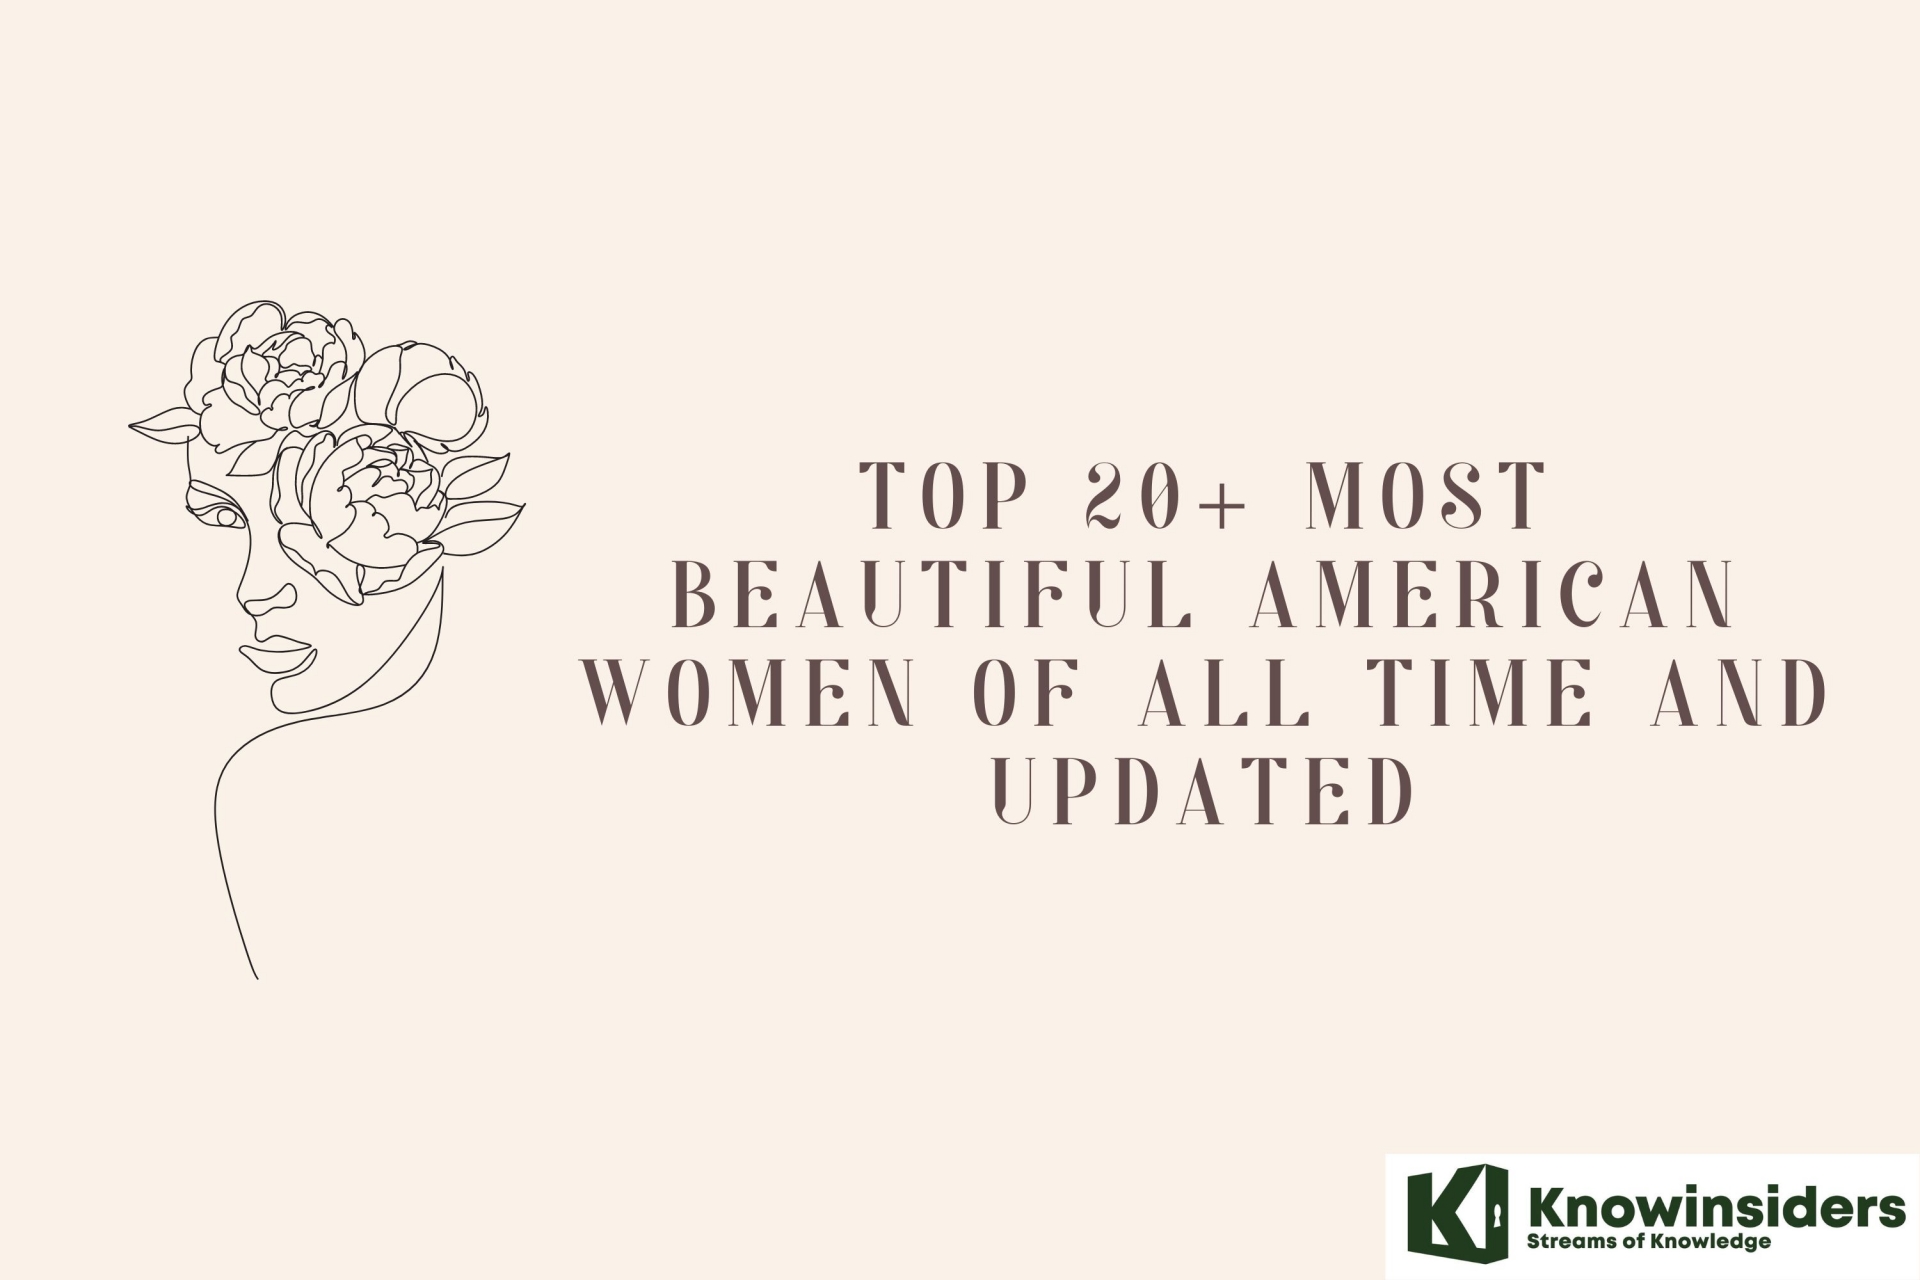 Top 20+ Most Beautiful American Women of All Time and Updated